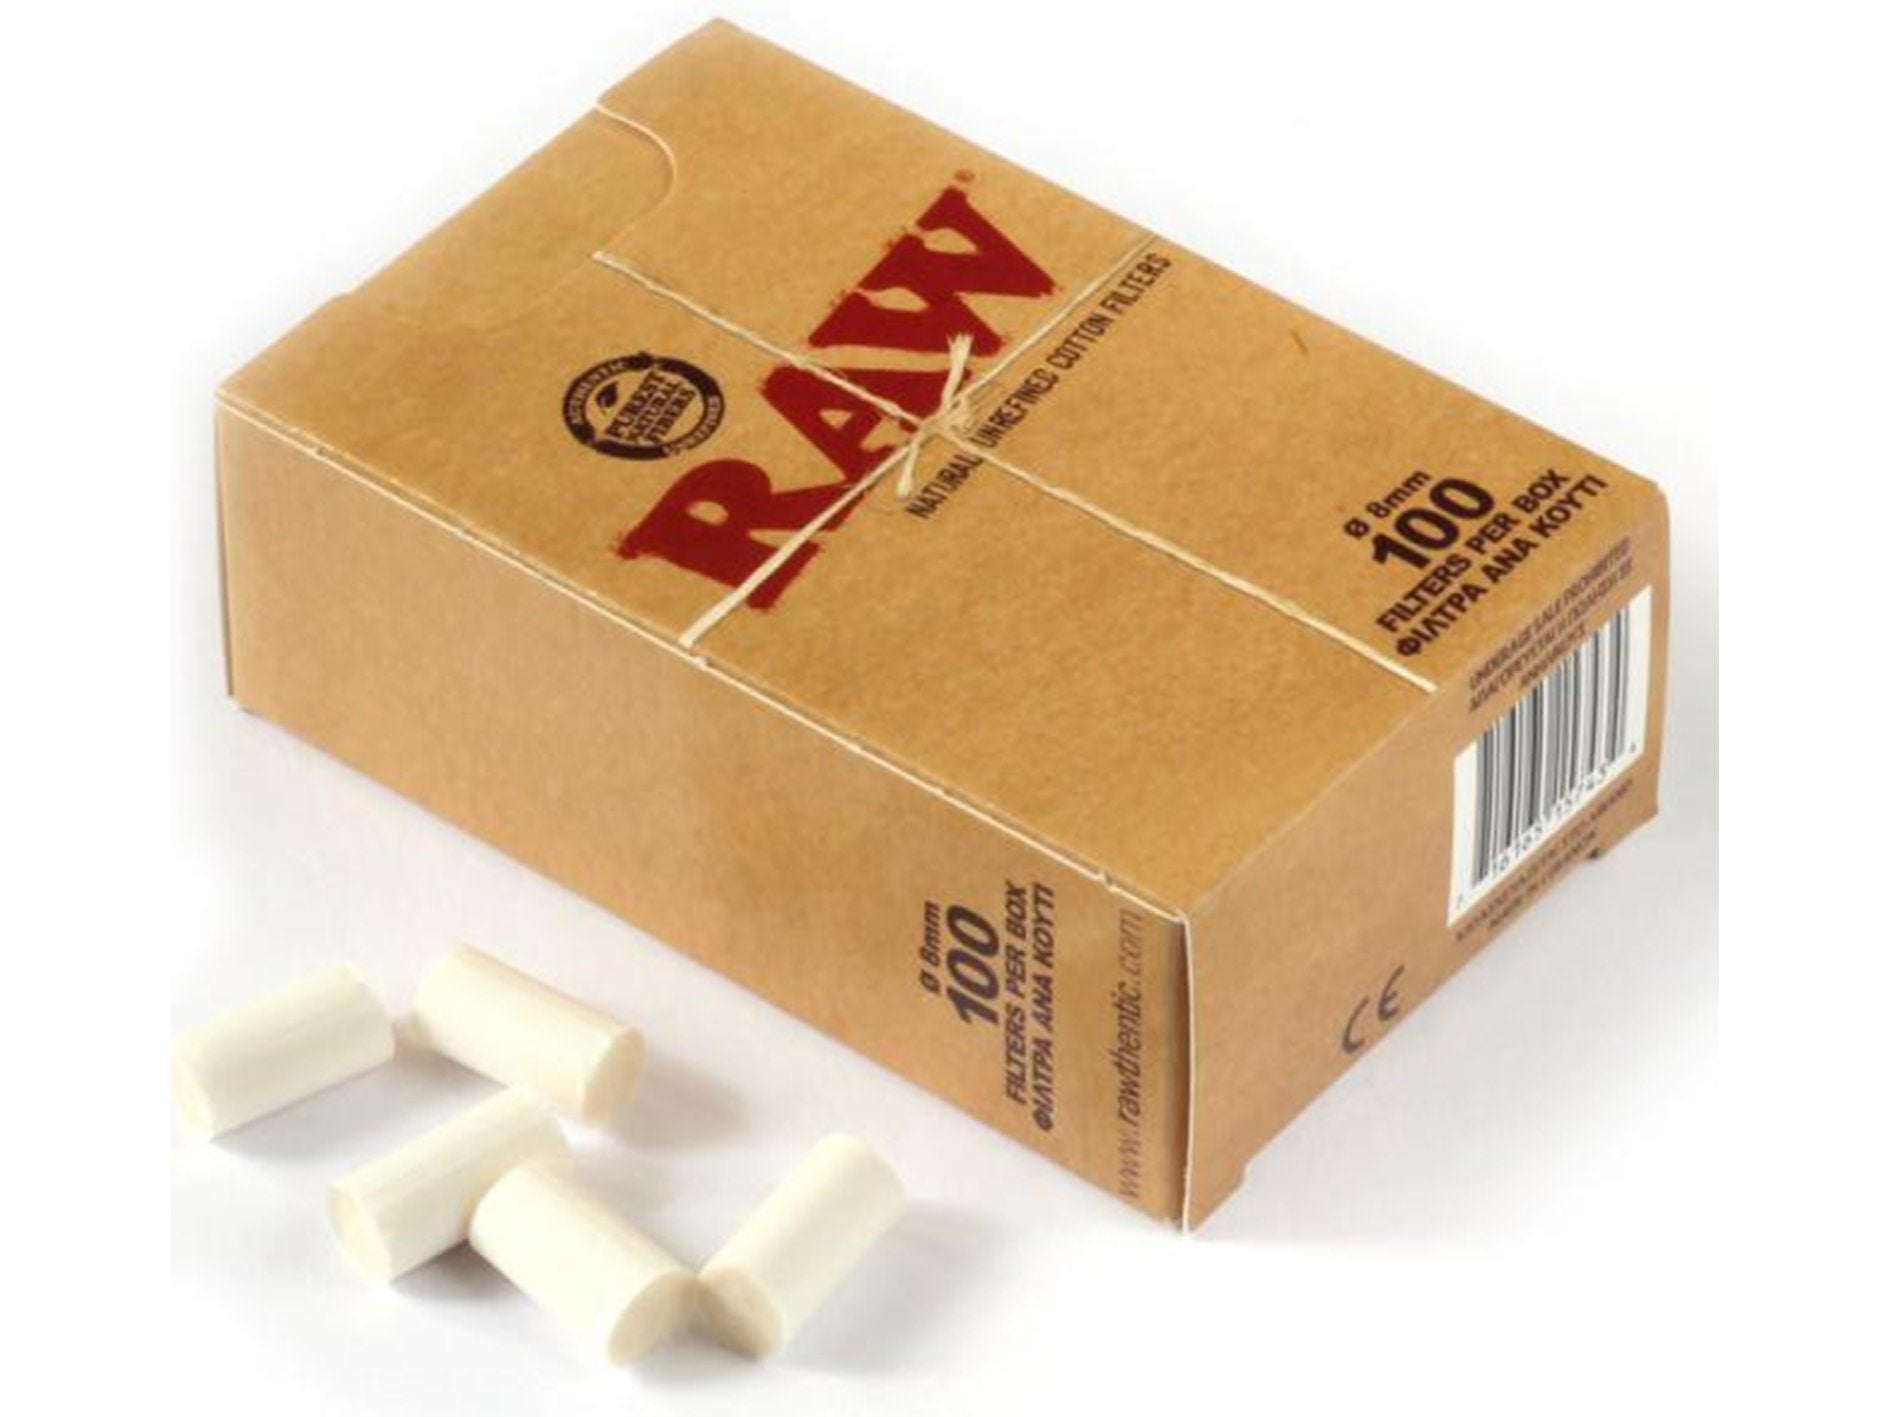 RAW Filter Unrefined Cotton Tips Slim Size 6mm 10 Boxes, 1200 Tips - VIR Wholesale